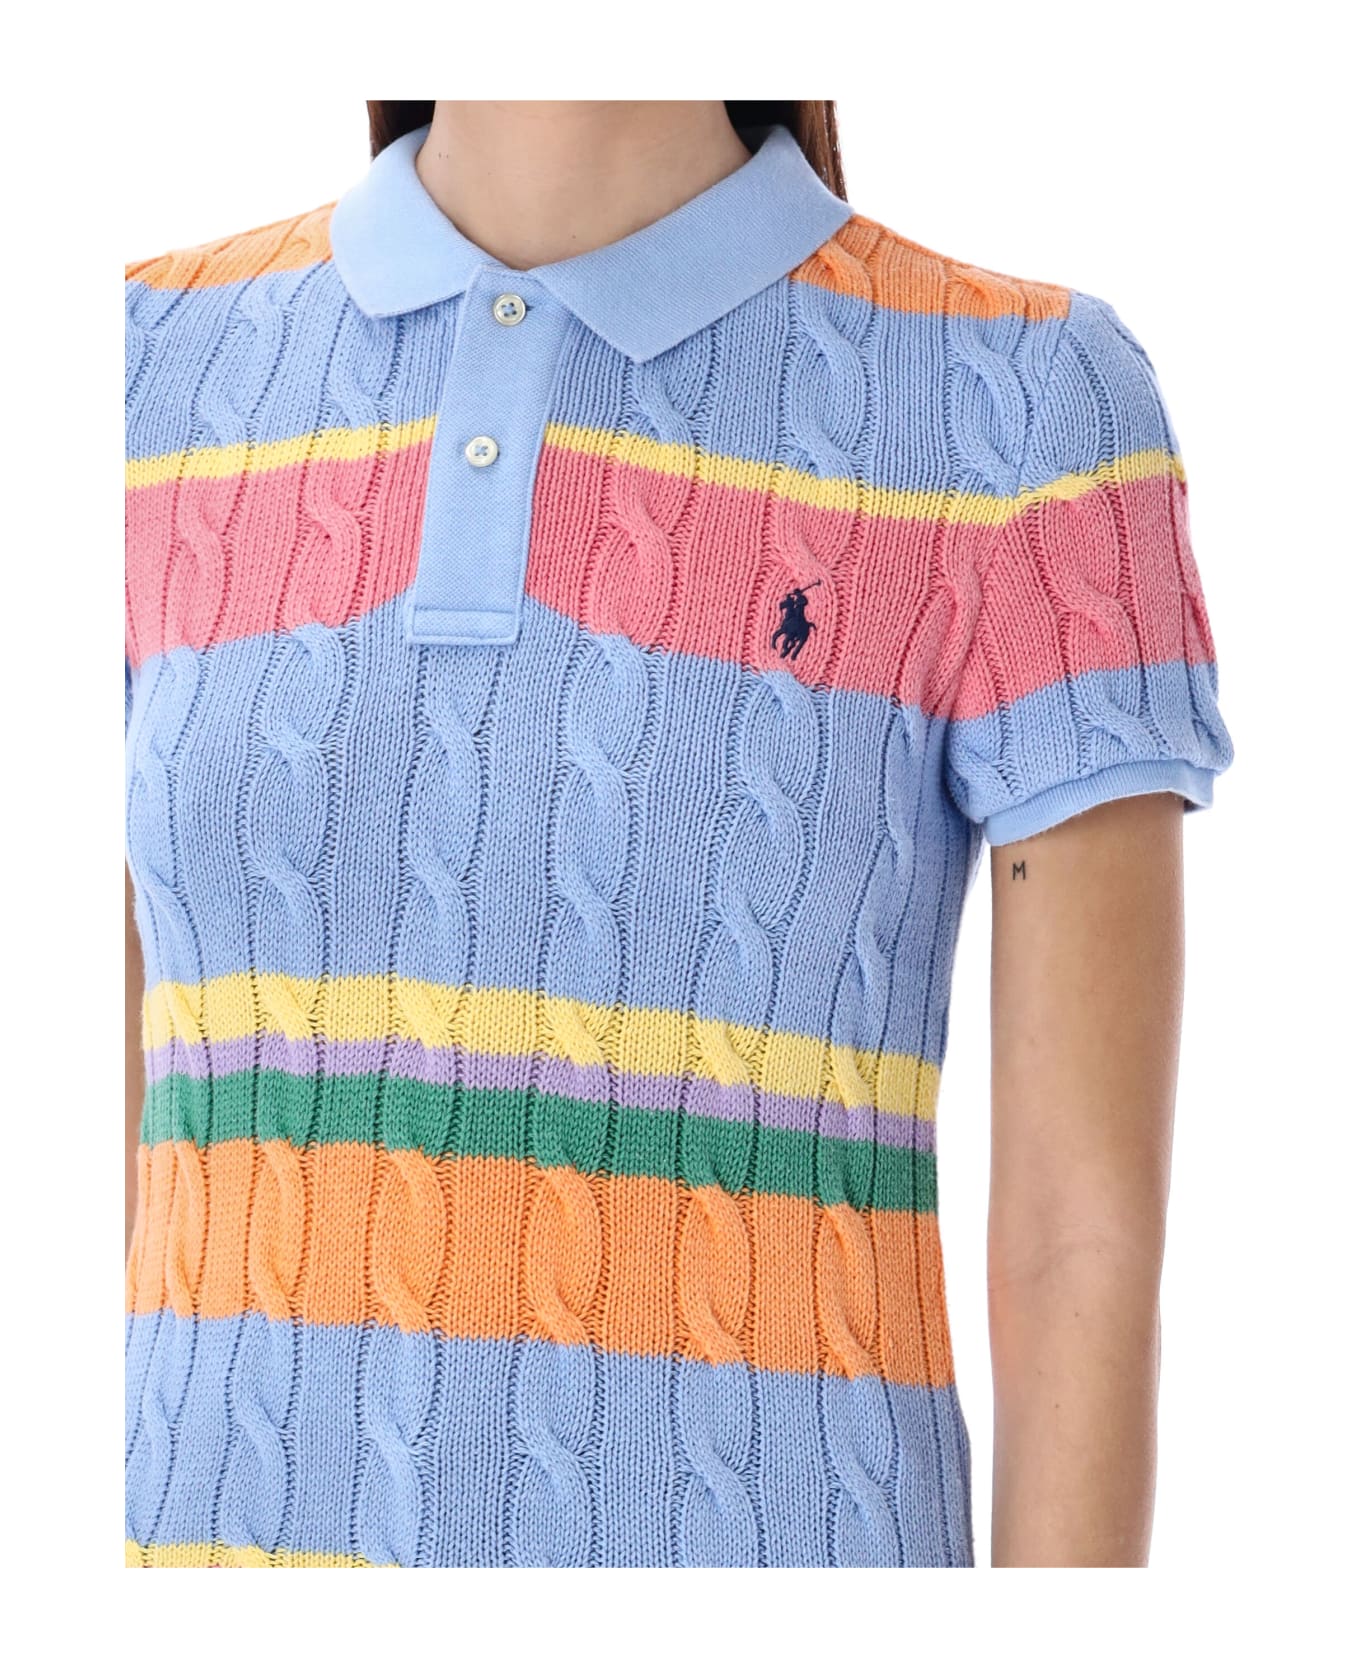 Polo Ralph Lauren Striped Cable Knit Polo Shirt - LIGHT BLUE ROSE MULTI